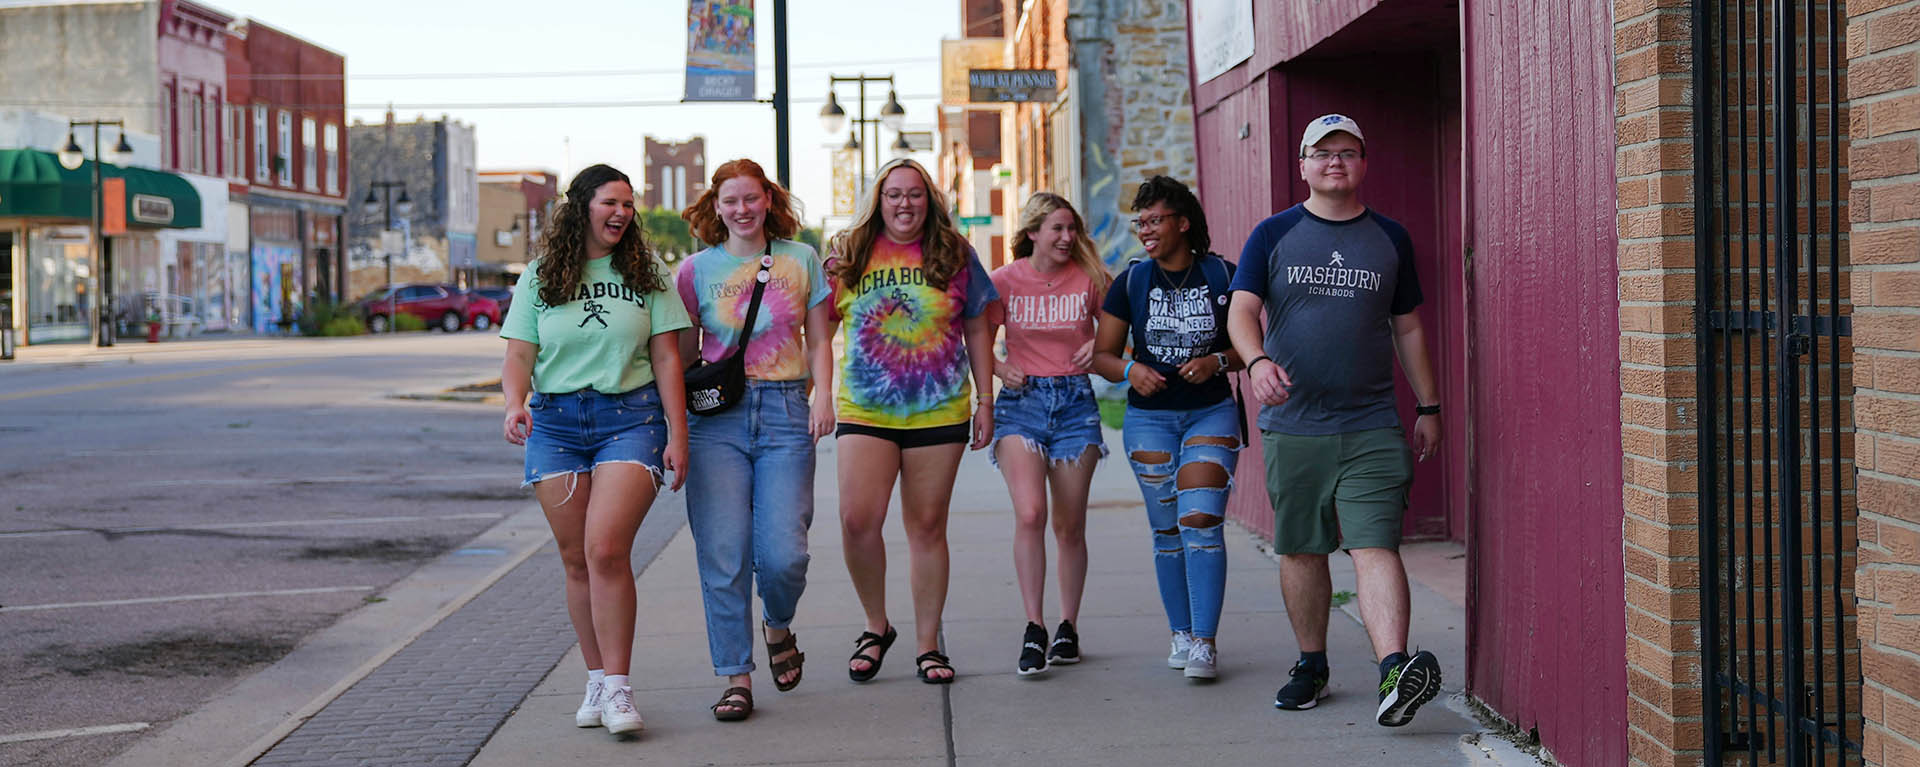 Students laugh and chat while walking down the sidewalk in NOTO.